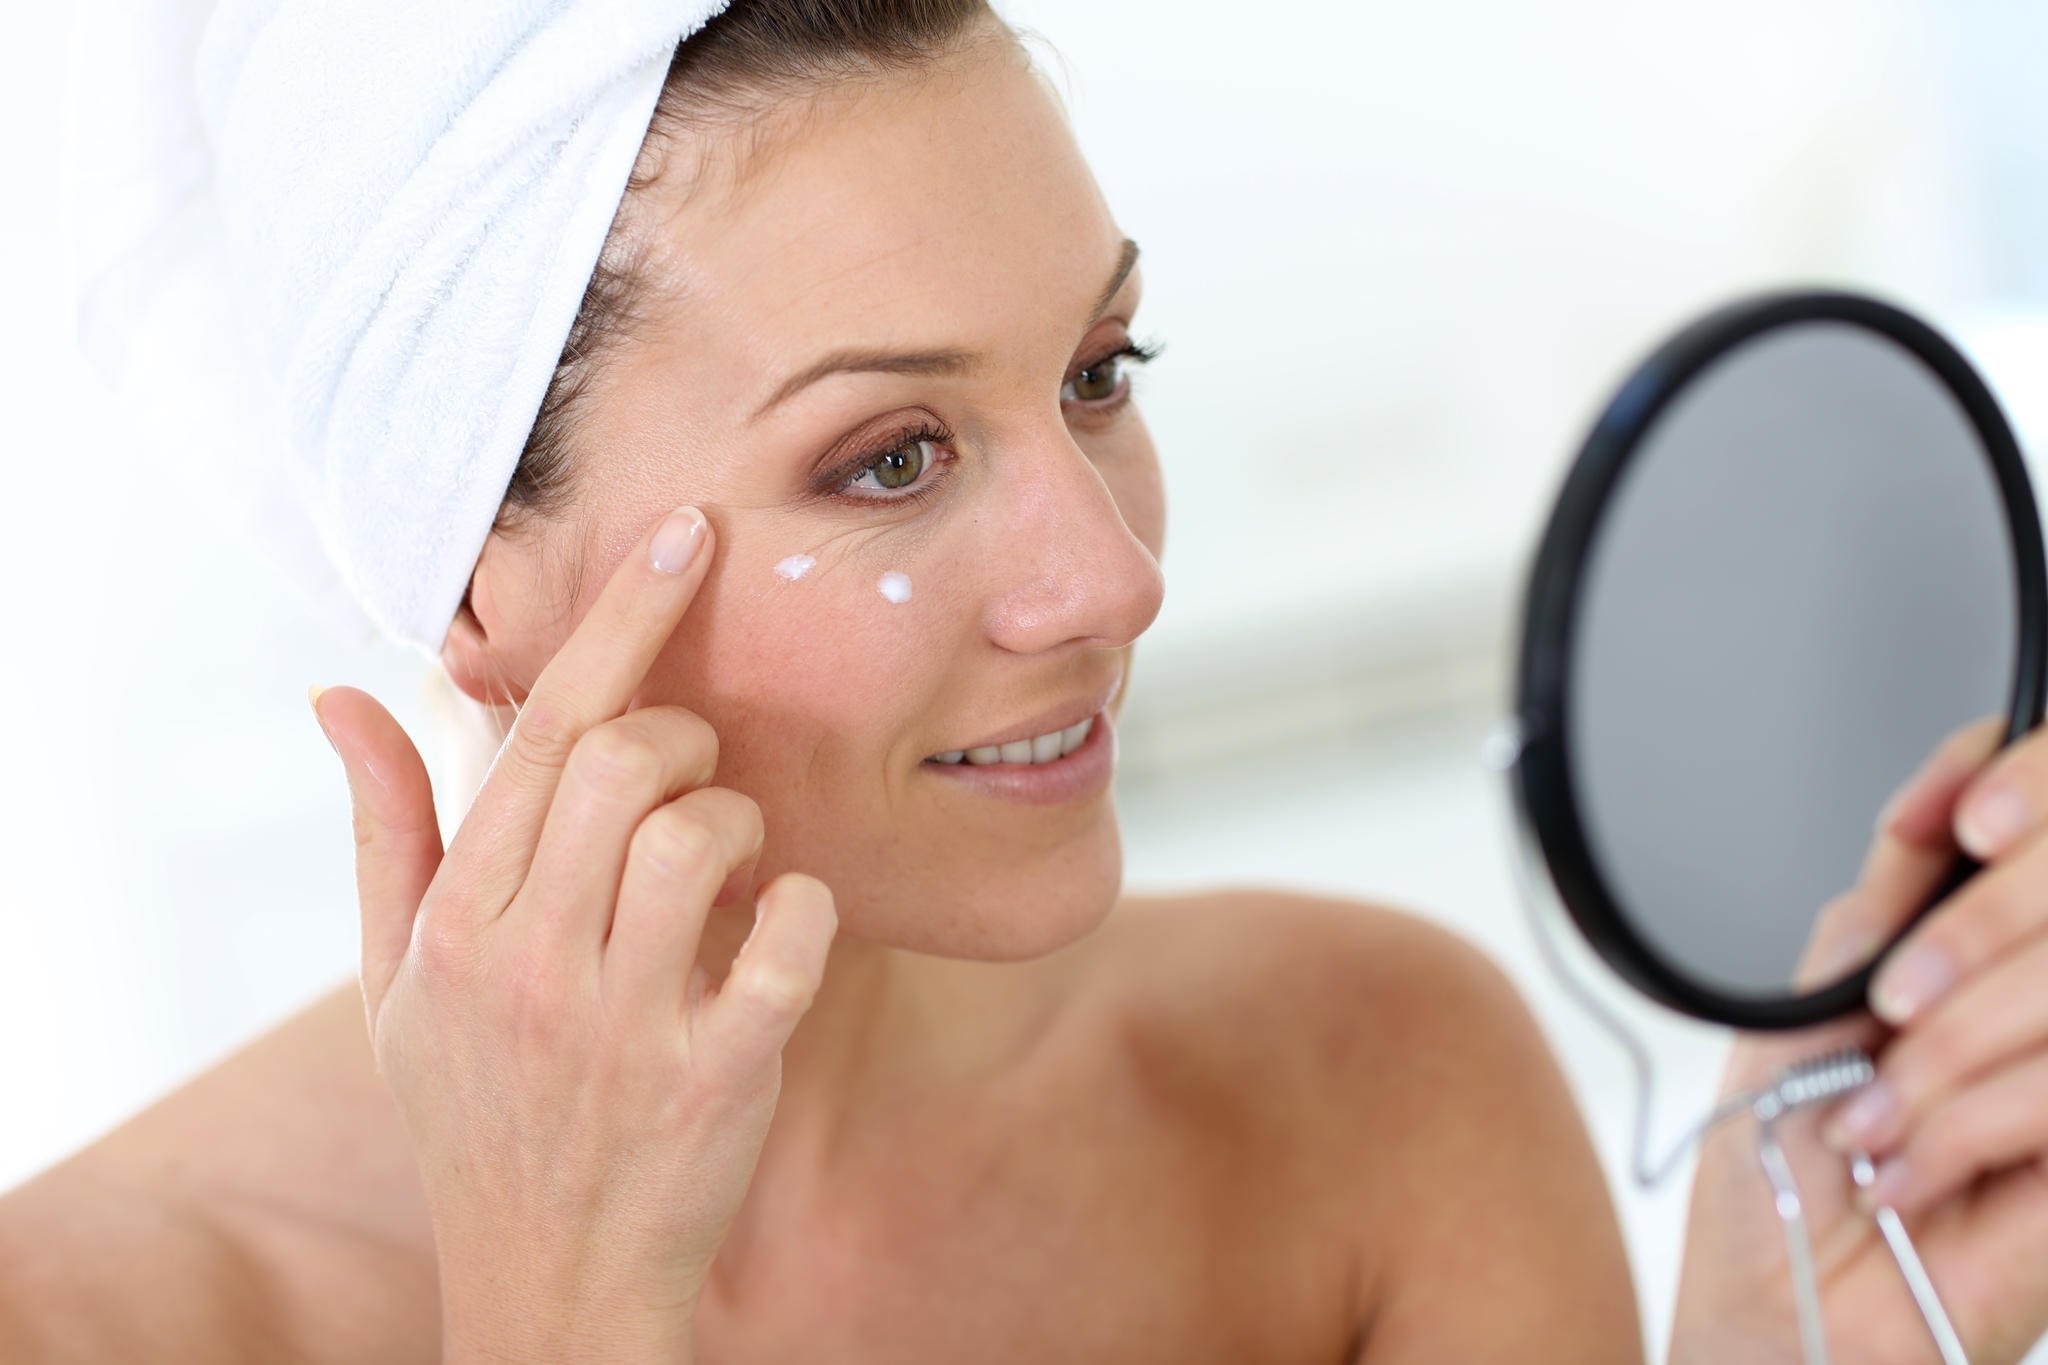 Fine Lines and Wrinkles: What Are the Causes and How to Deal With Them?